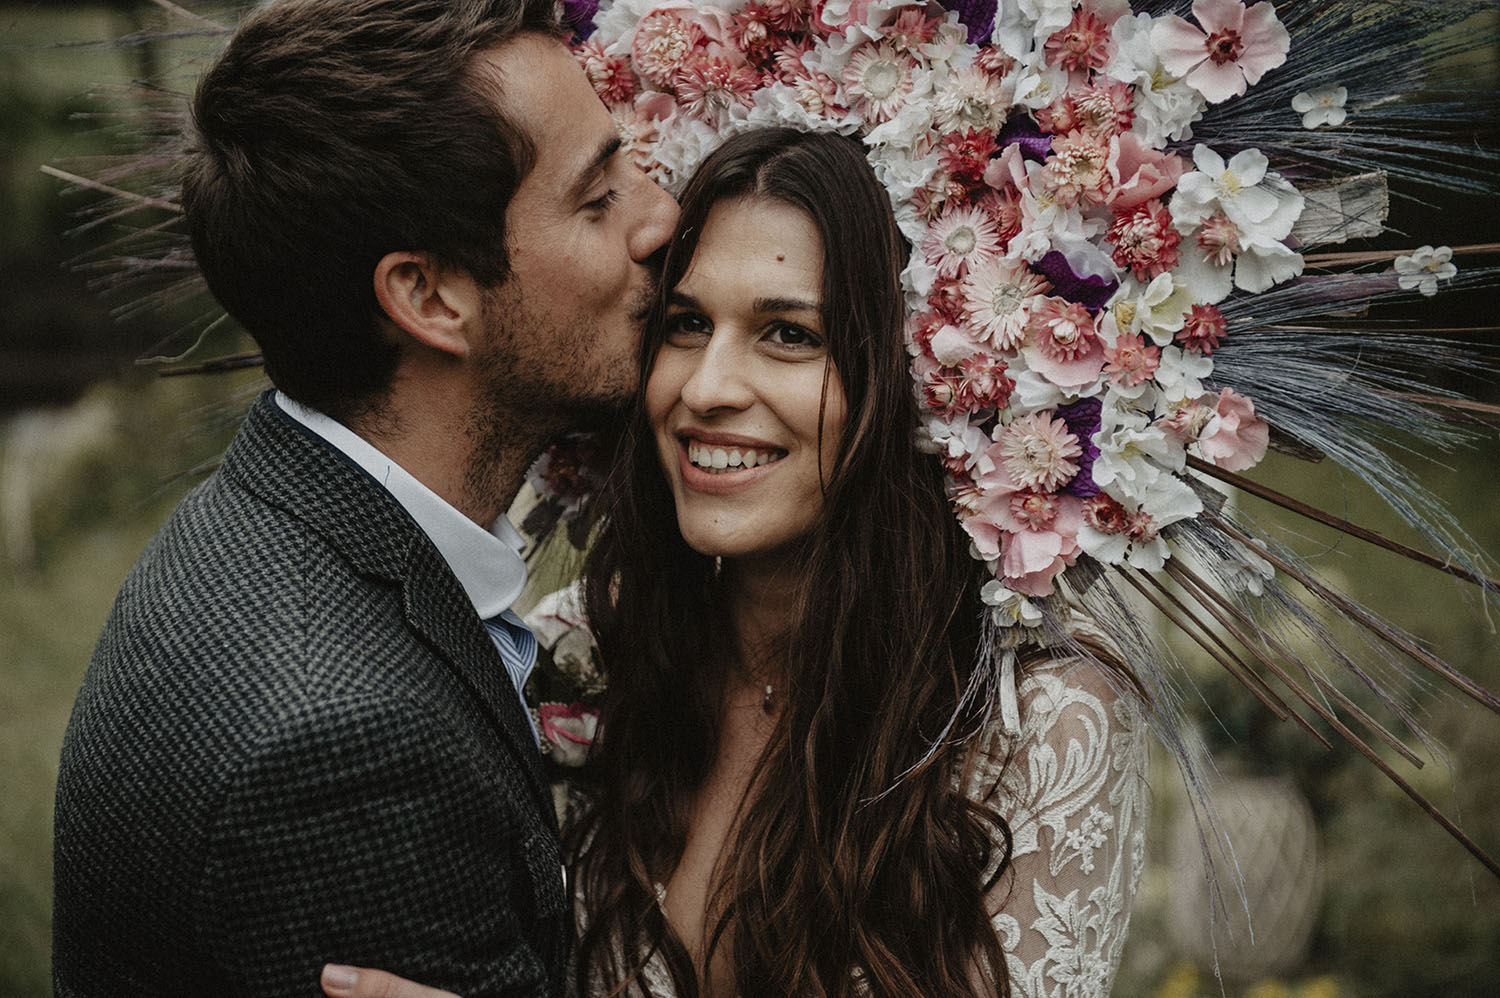 Boho wedding at Coco Barn Wood Lodge in Landes, France. Lifestyle wedding photographer, modern and authentic way to capture your wedding.